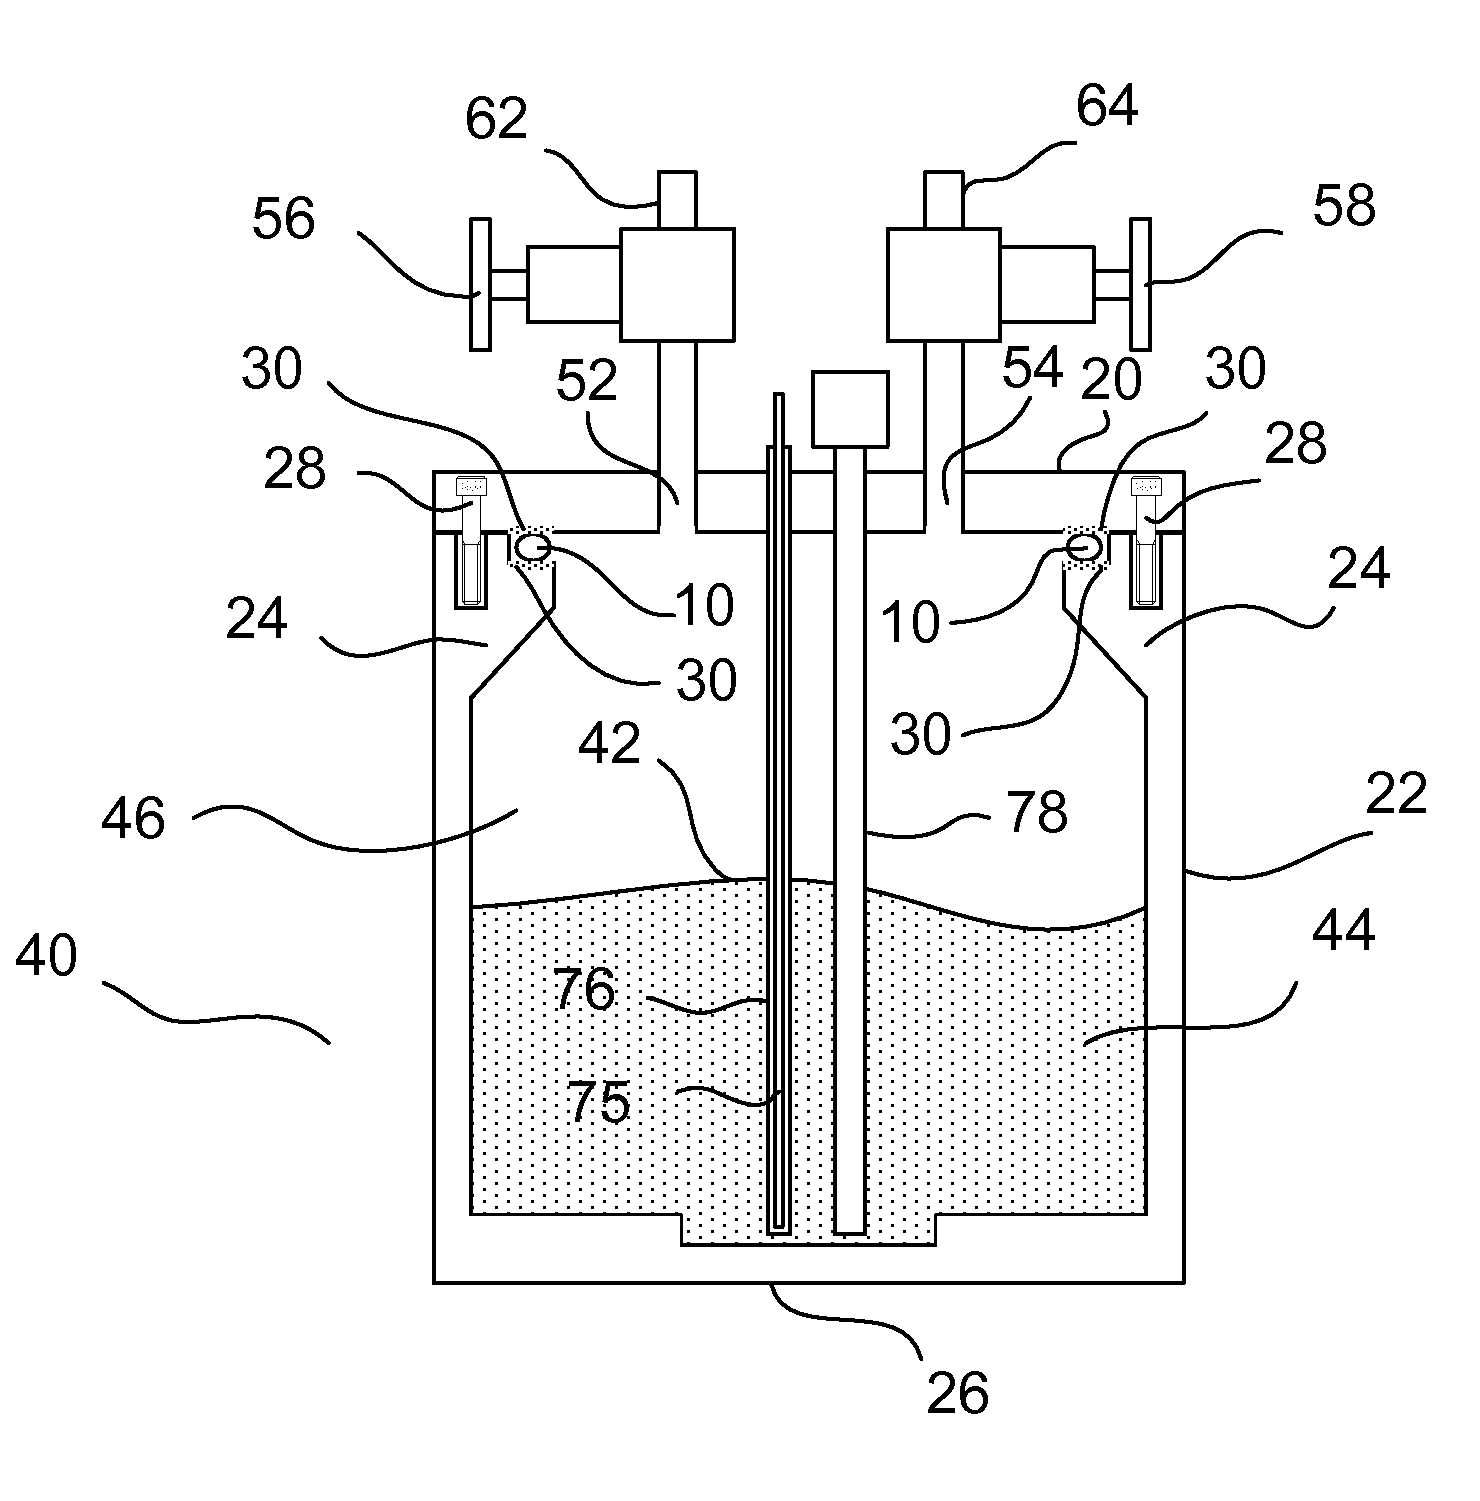 Diptube apparatus and method for delivering vapor phase reagent to a deposition chamber